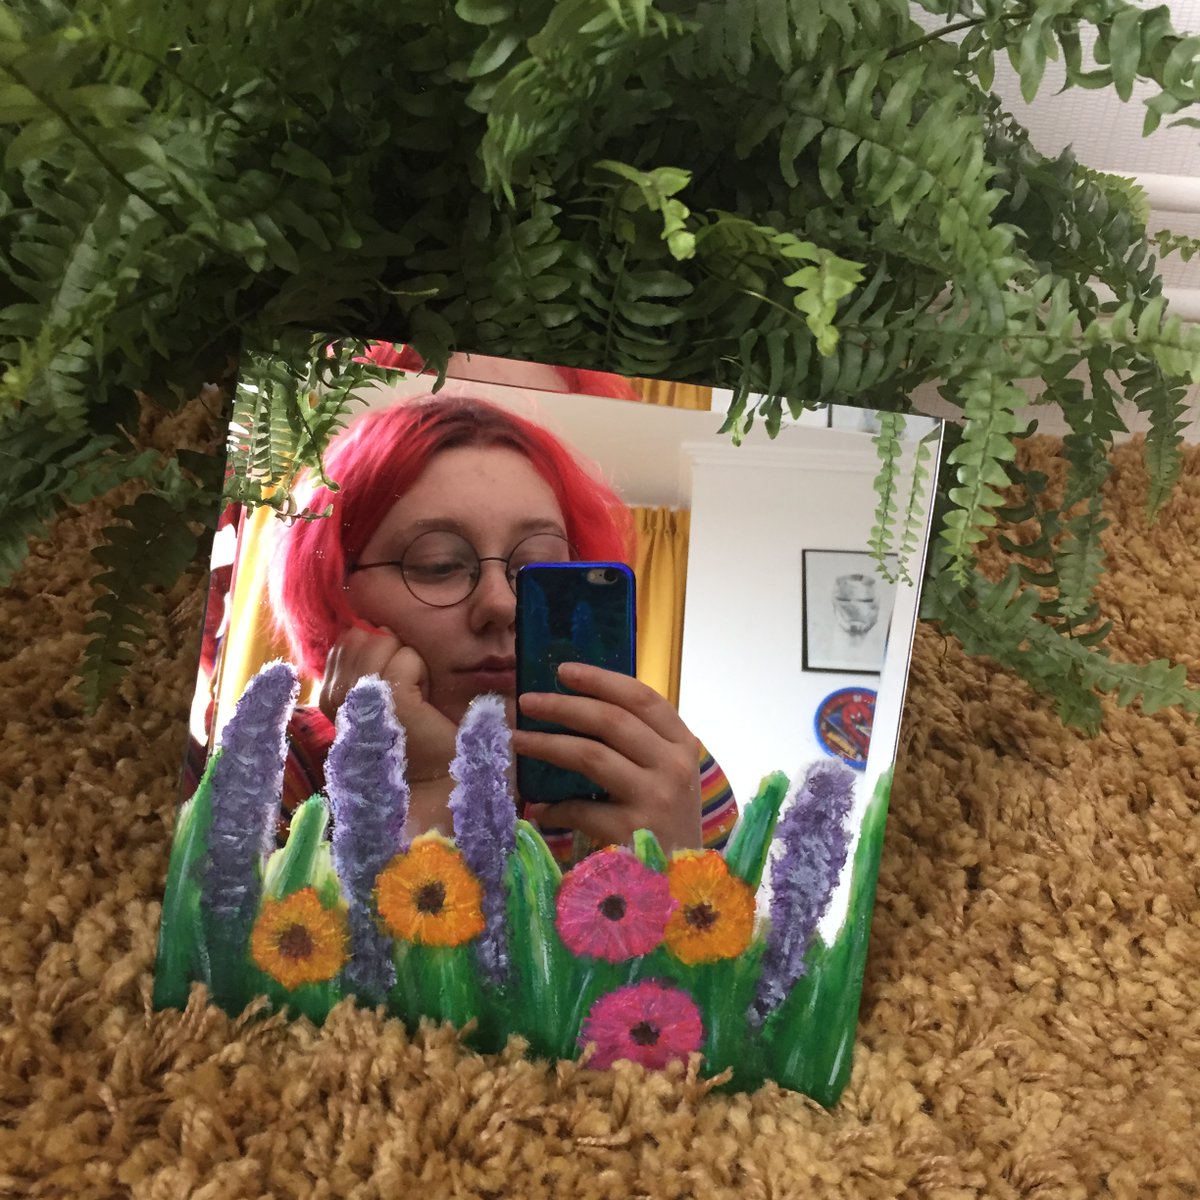 FLOWER FIELD PAINTED MIRROR - hand painted - thrifted and upcylced - €17 with free shipping to the Netherlands. International shipping possible https://www.etsy.com/listing/855743661/frameless-hand-painted-mirror-flower?ref=shop_home_active_3&frs=1